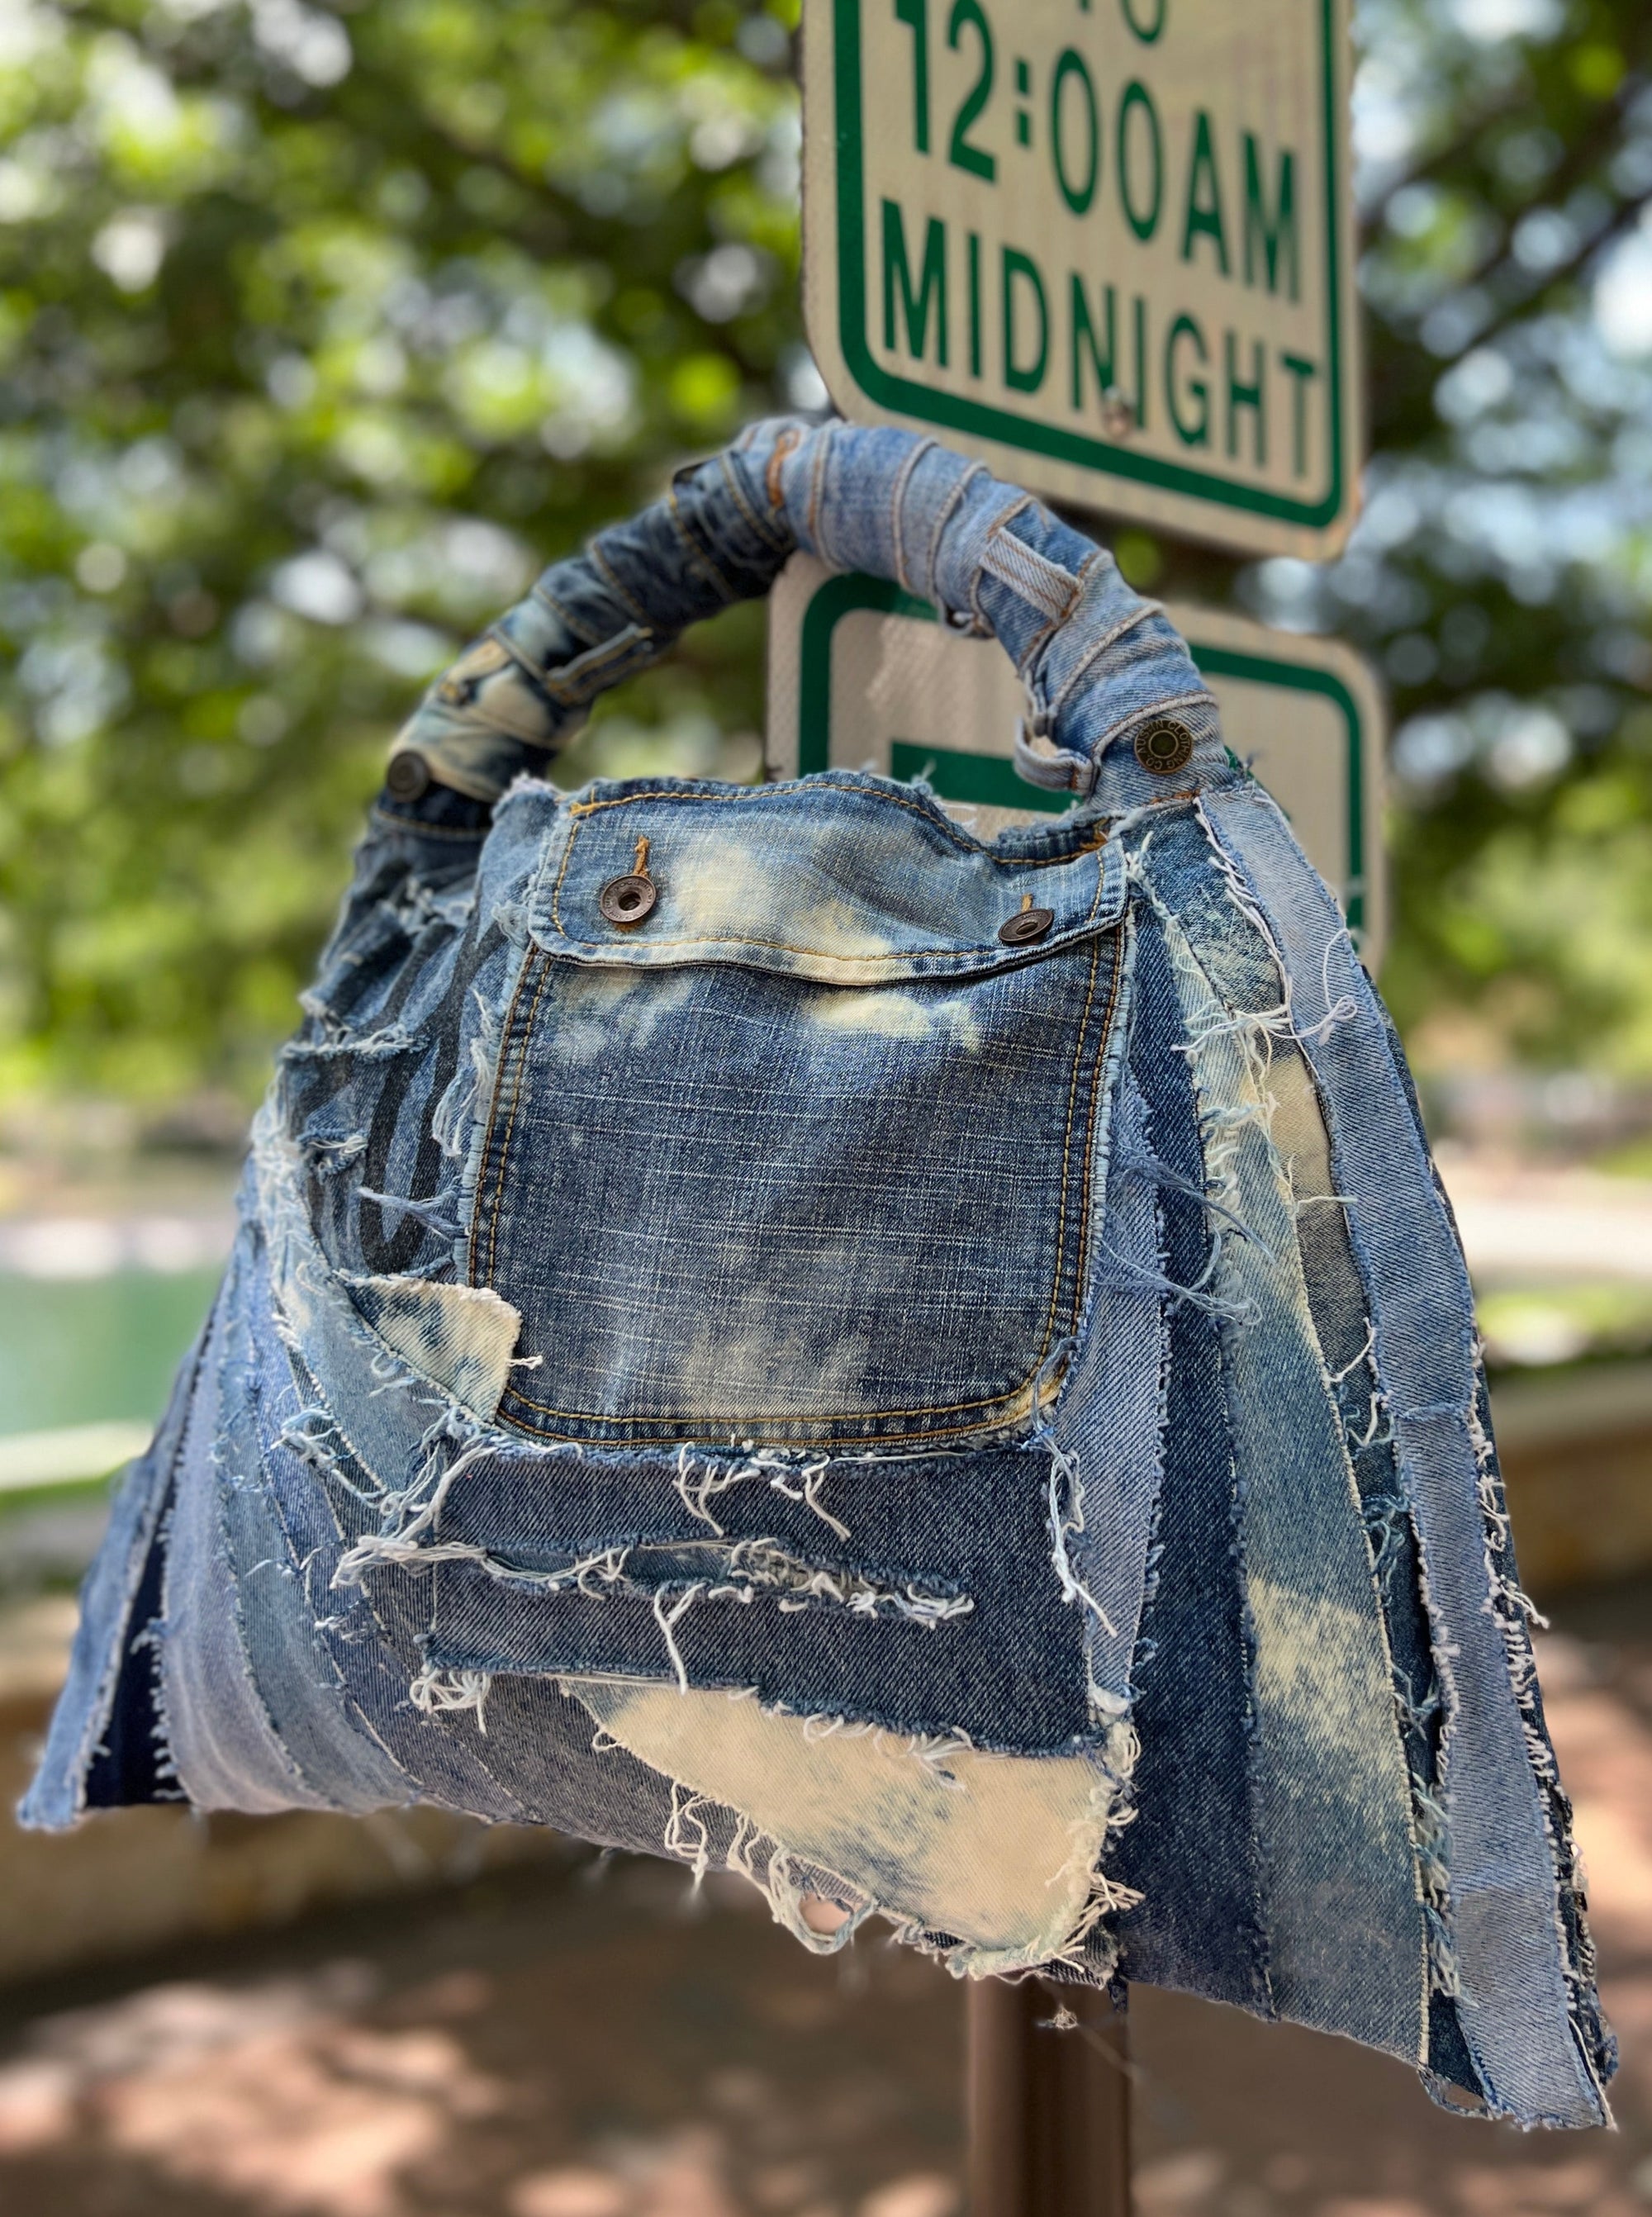 Large Ugly Ripped To Shred Denim Upcycled Stuff And Go Bag